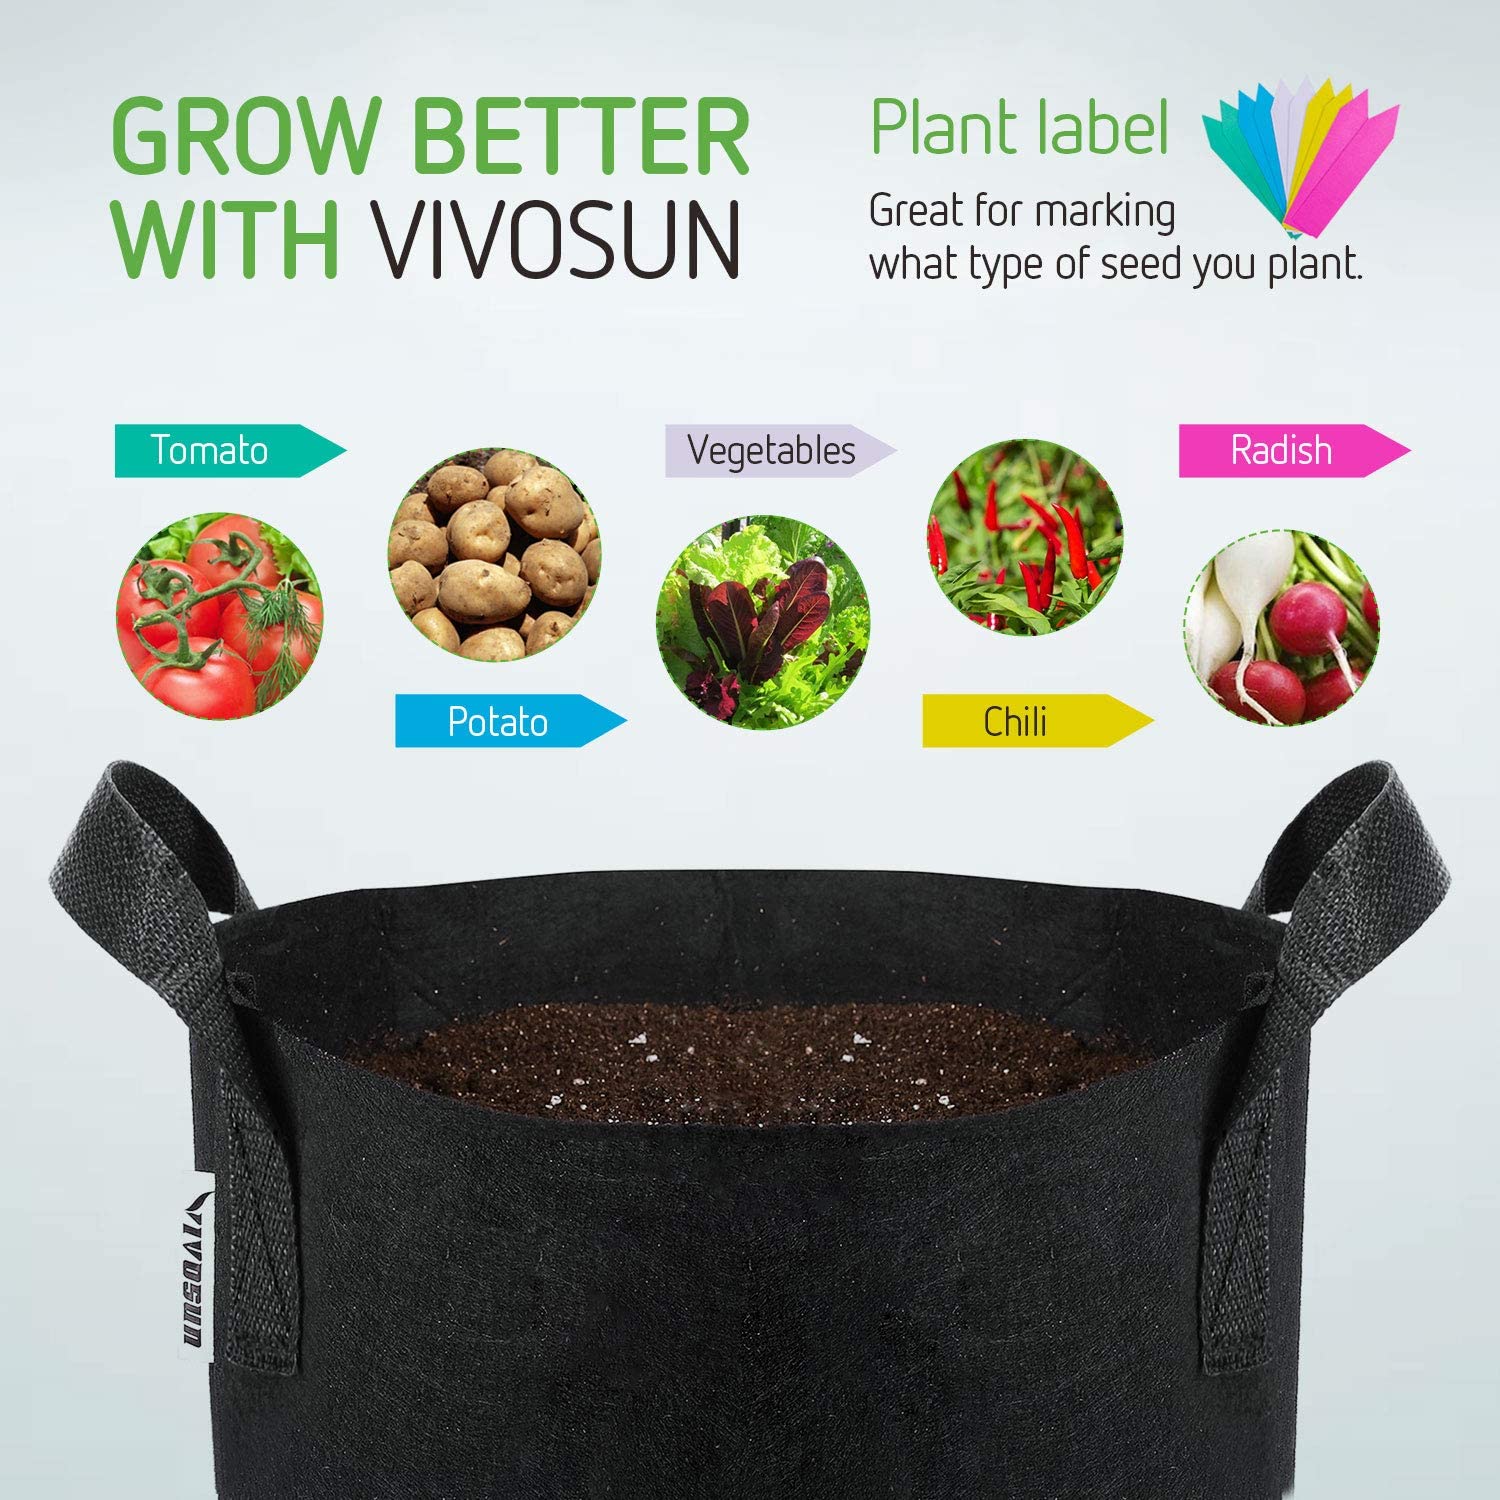 VIVOSUN fabric grow bags readily breathe, keeping roots and soil oxygenated and cool throughout the year.